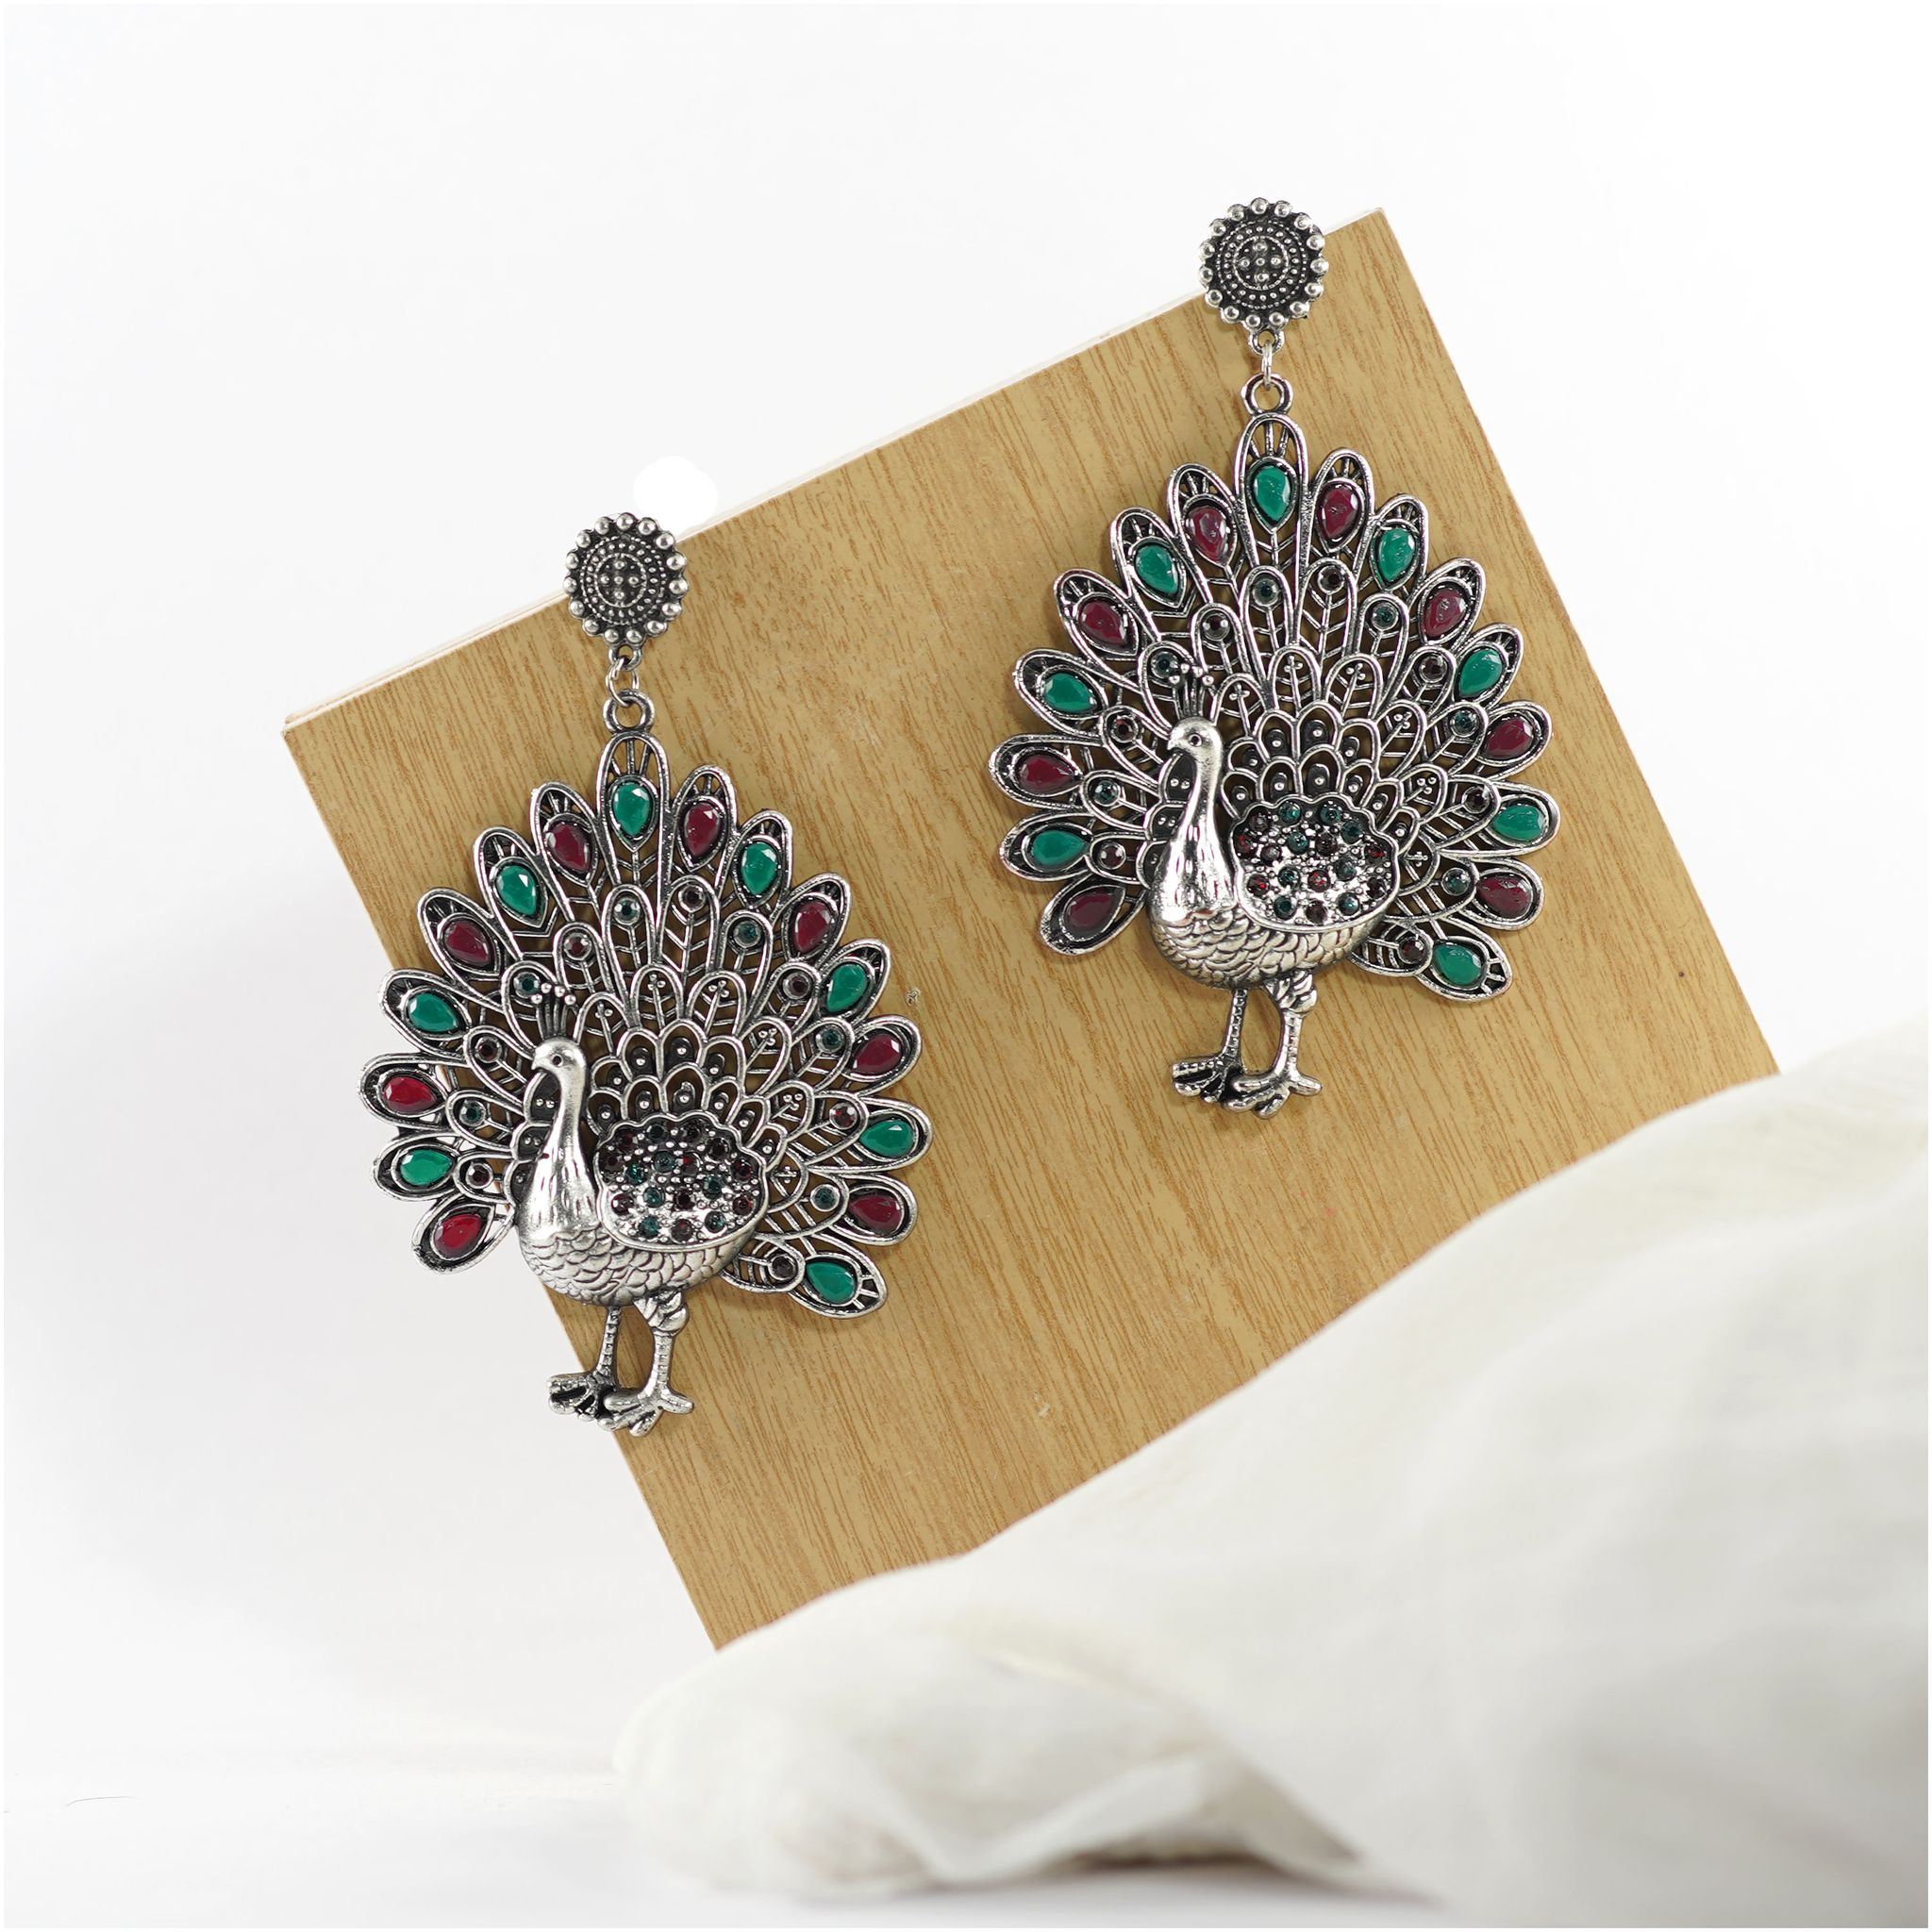 Neeara Fashion's Handcrafted Multicolor peacock  Motif Silver Oxidised  Vintage Stone Studded-Inspired Earrings